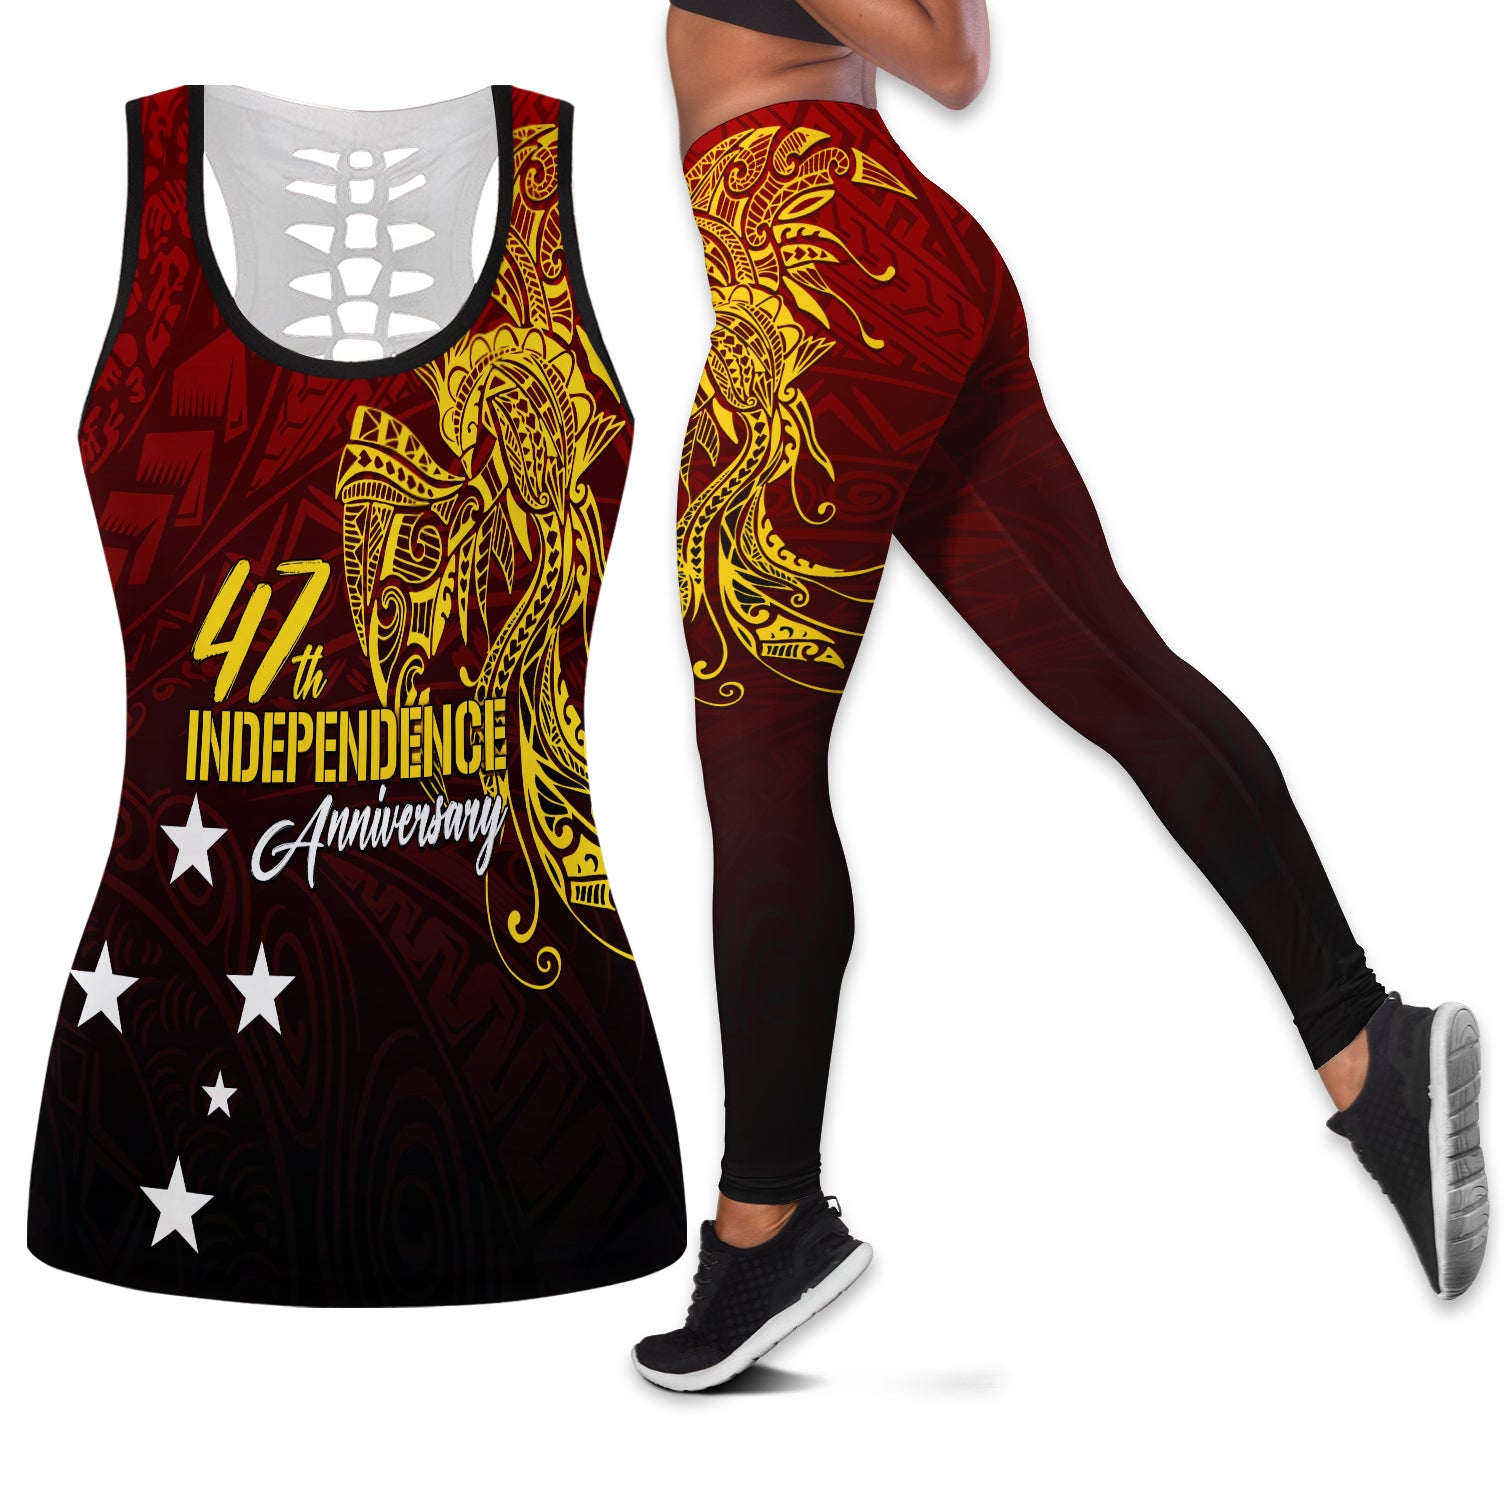 Papua New Guinea Hollow Tank and Leggings Combo 47th Independence Anniversary - Tribal Bird of Paradise LT7